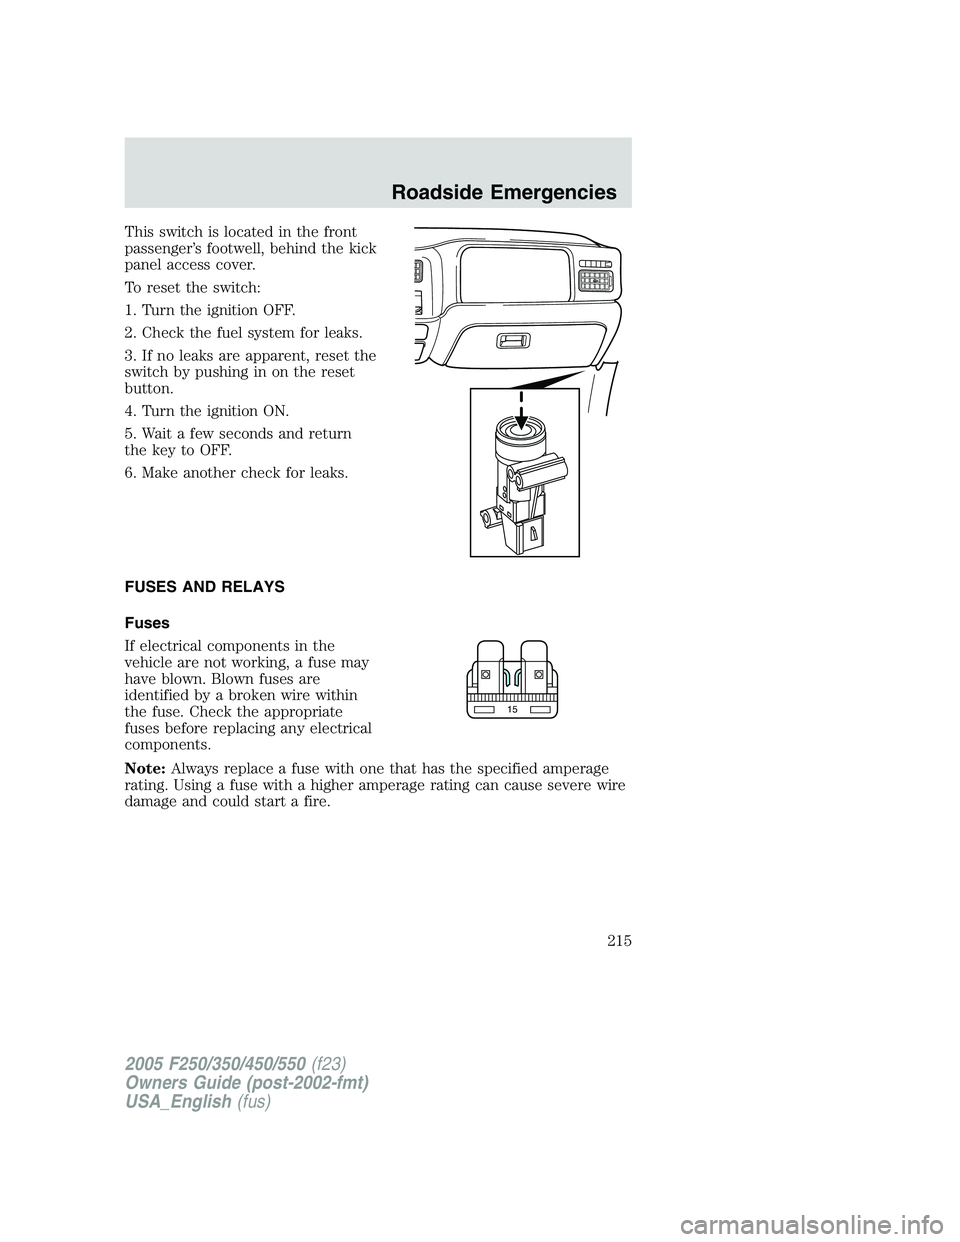 FORD F250 SUPER DUTY 2005  Owners Manual This switch is located in the front
passenger’s footwell, behind the kick
panel access cover.
To reset the switch:
1. Turn the ignition OFF.
2. Check the fuel system for leaks.
3. If no leaks are ap